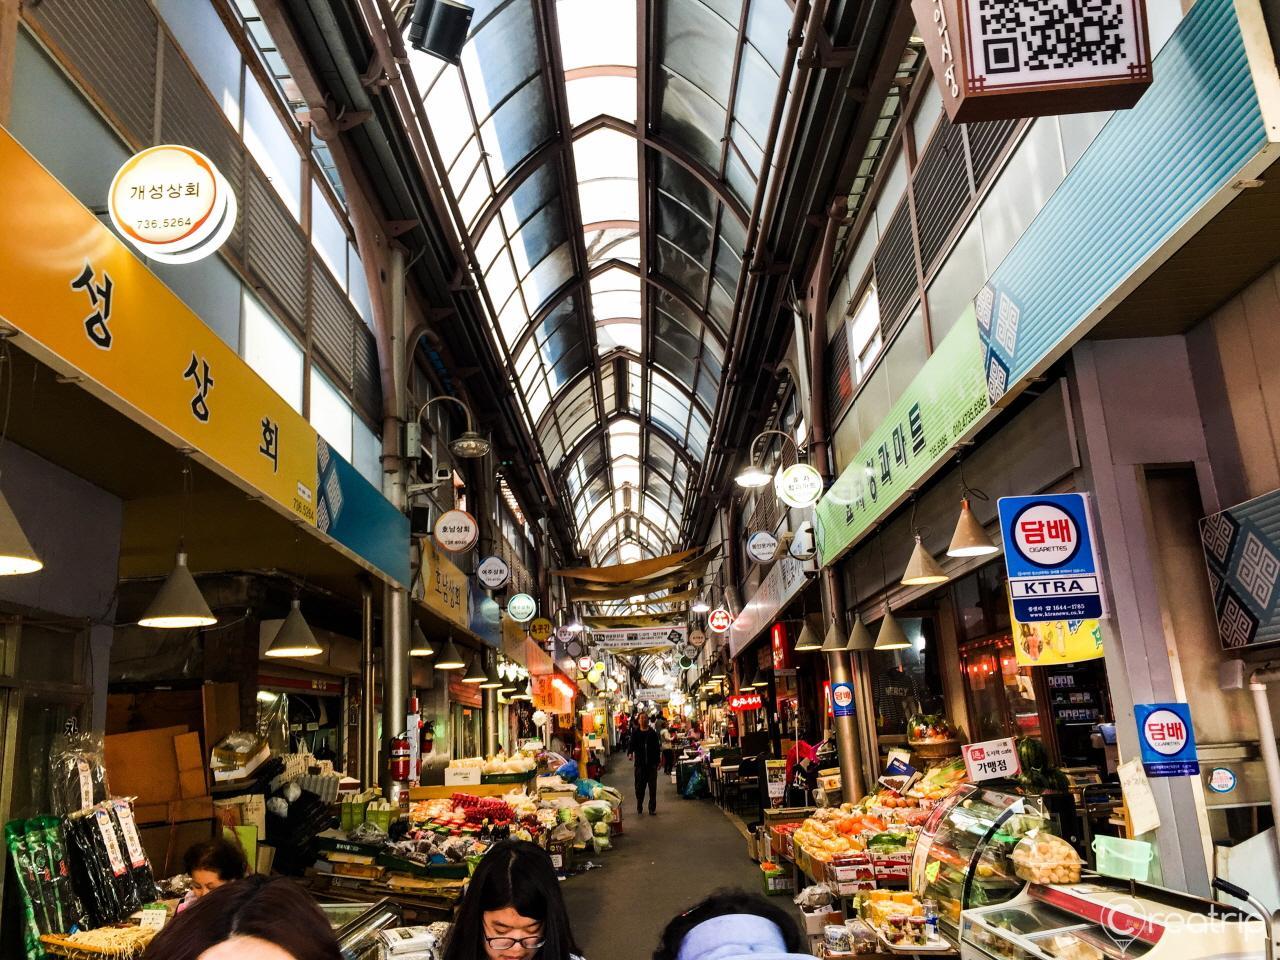 Busy and vibrant public market in Korea's city center - shoppers and vendors busy in the bustling streets of 통인시장.